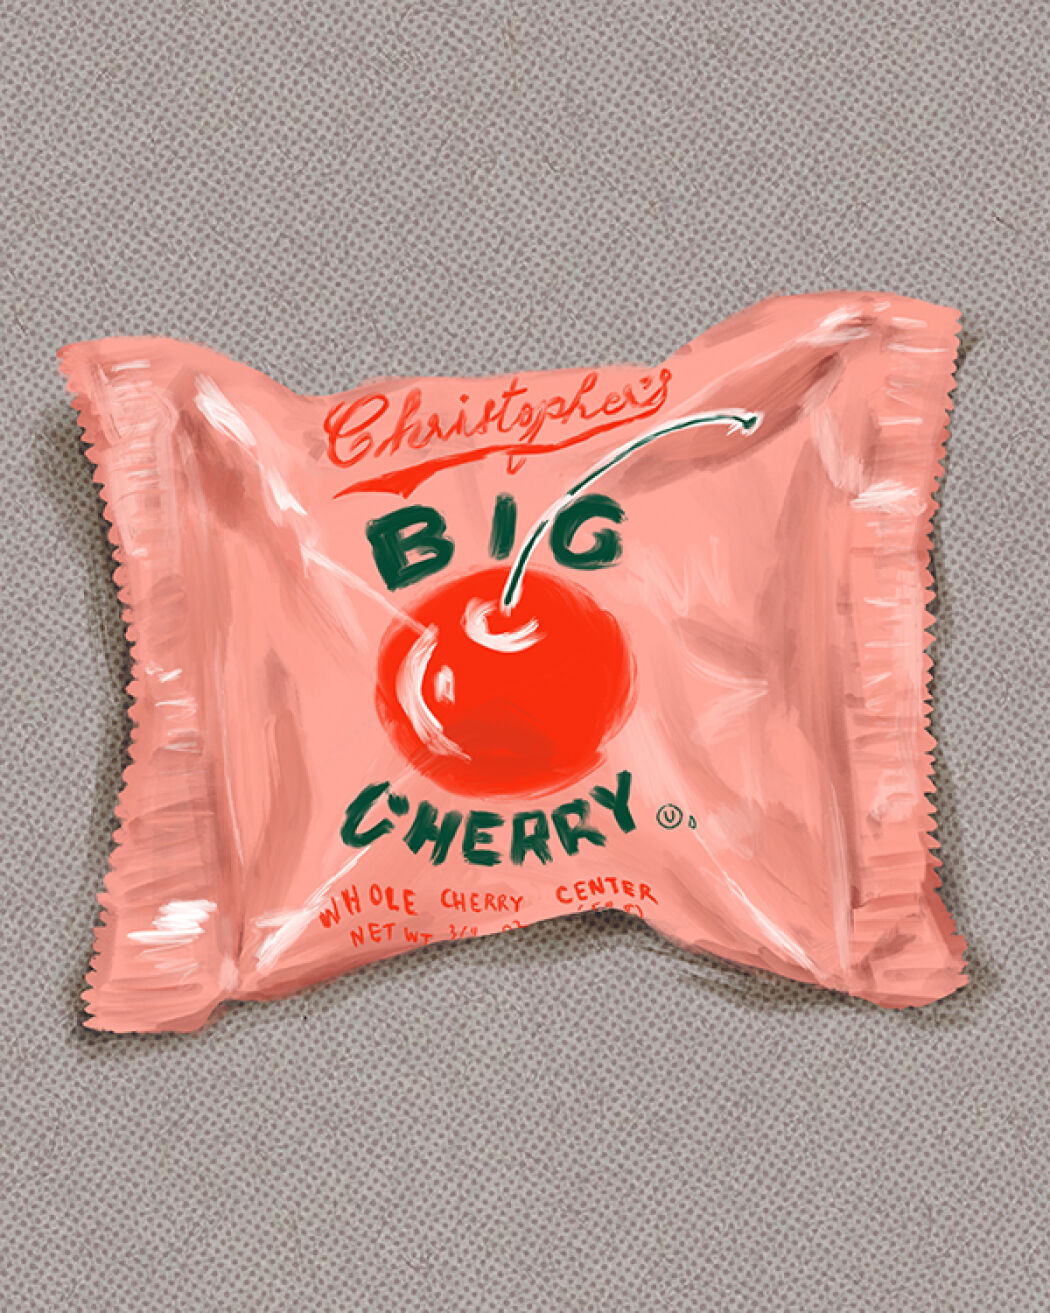 Candy packaging illustration by Christina Gliha for Christopher´s Candy Company